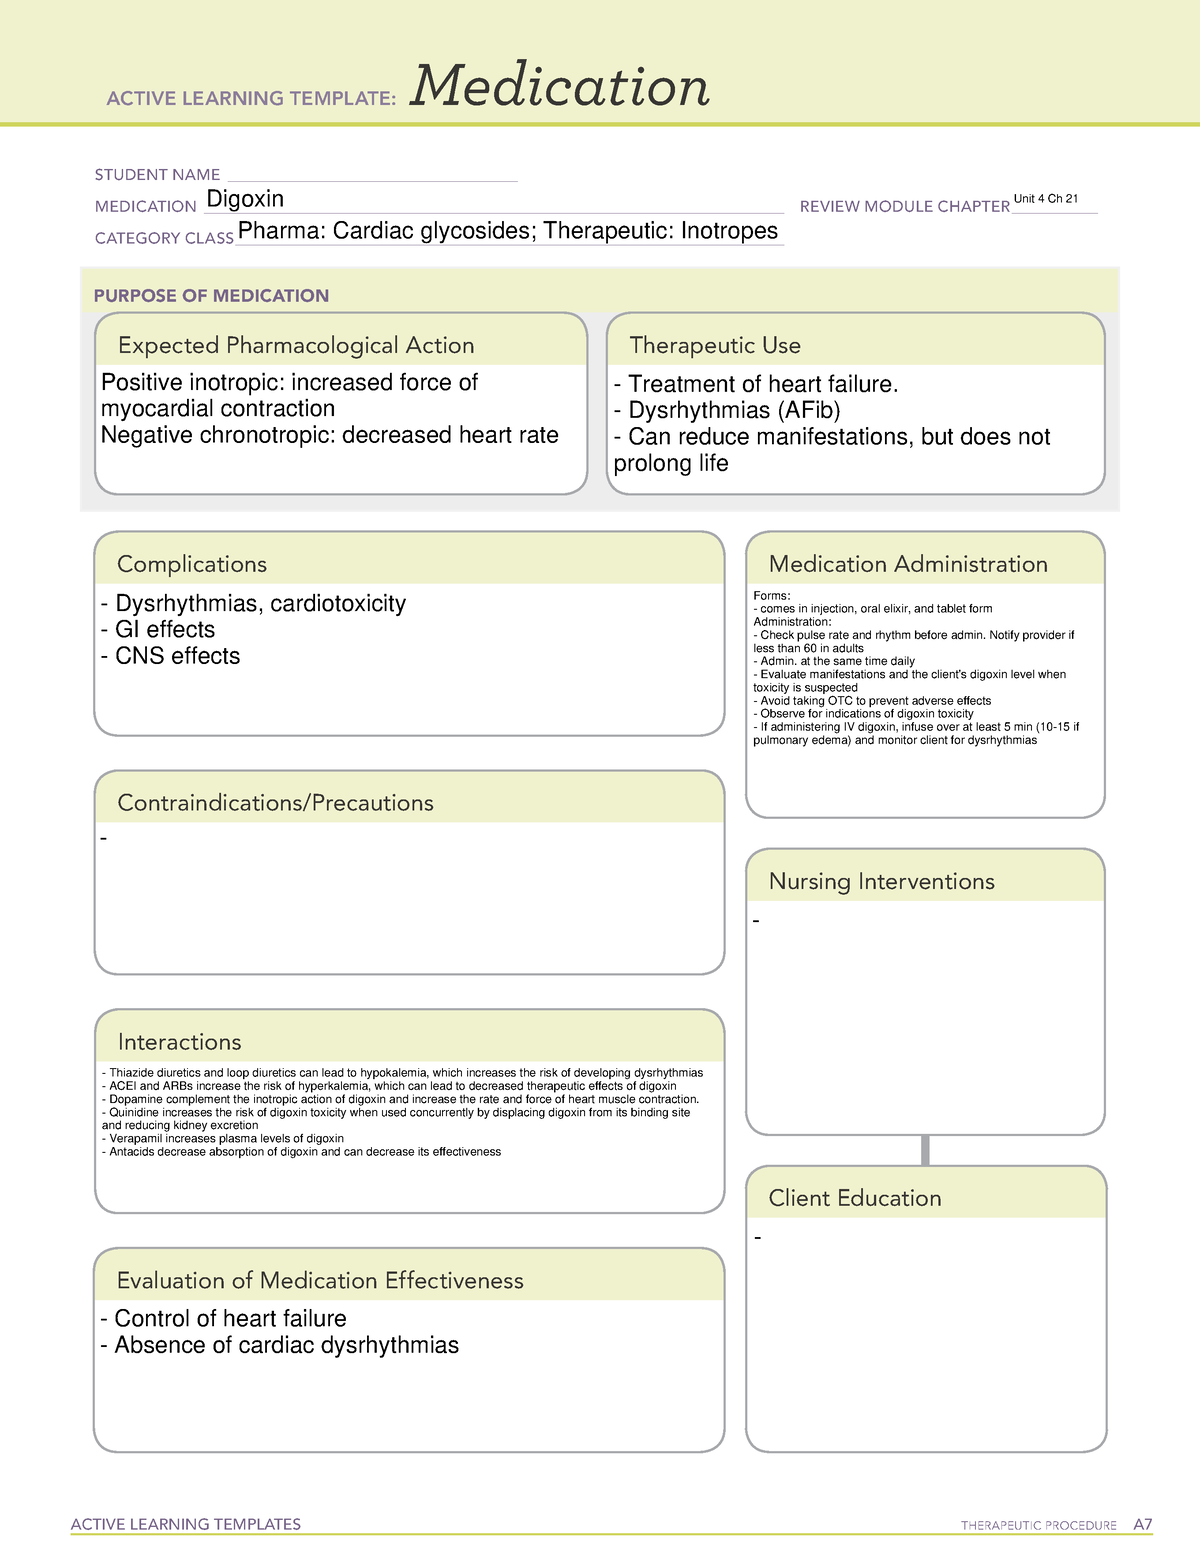 Digoxin (Medication ALT) ACTIVE LEARNING TEMPLATES THERAPEUTIC PROCEDURE A Medication STUDENT